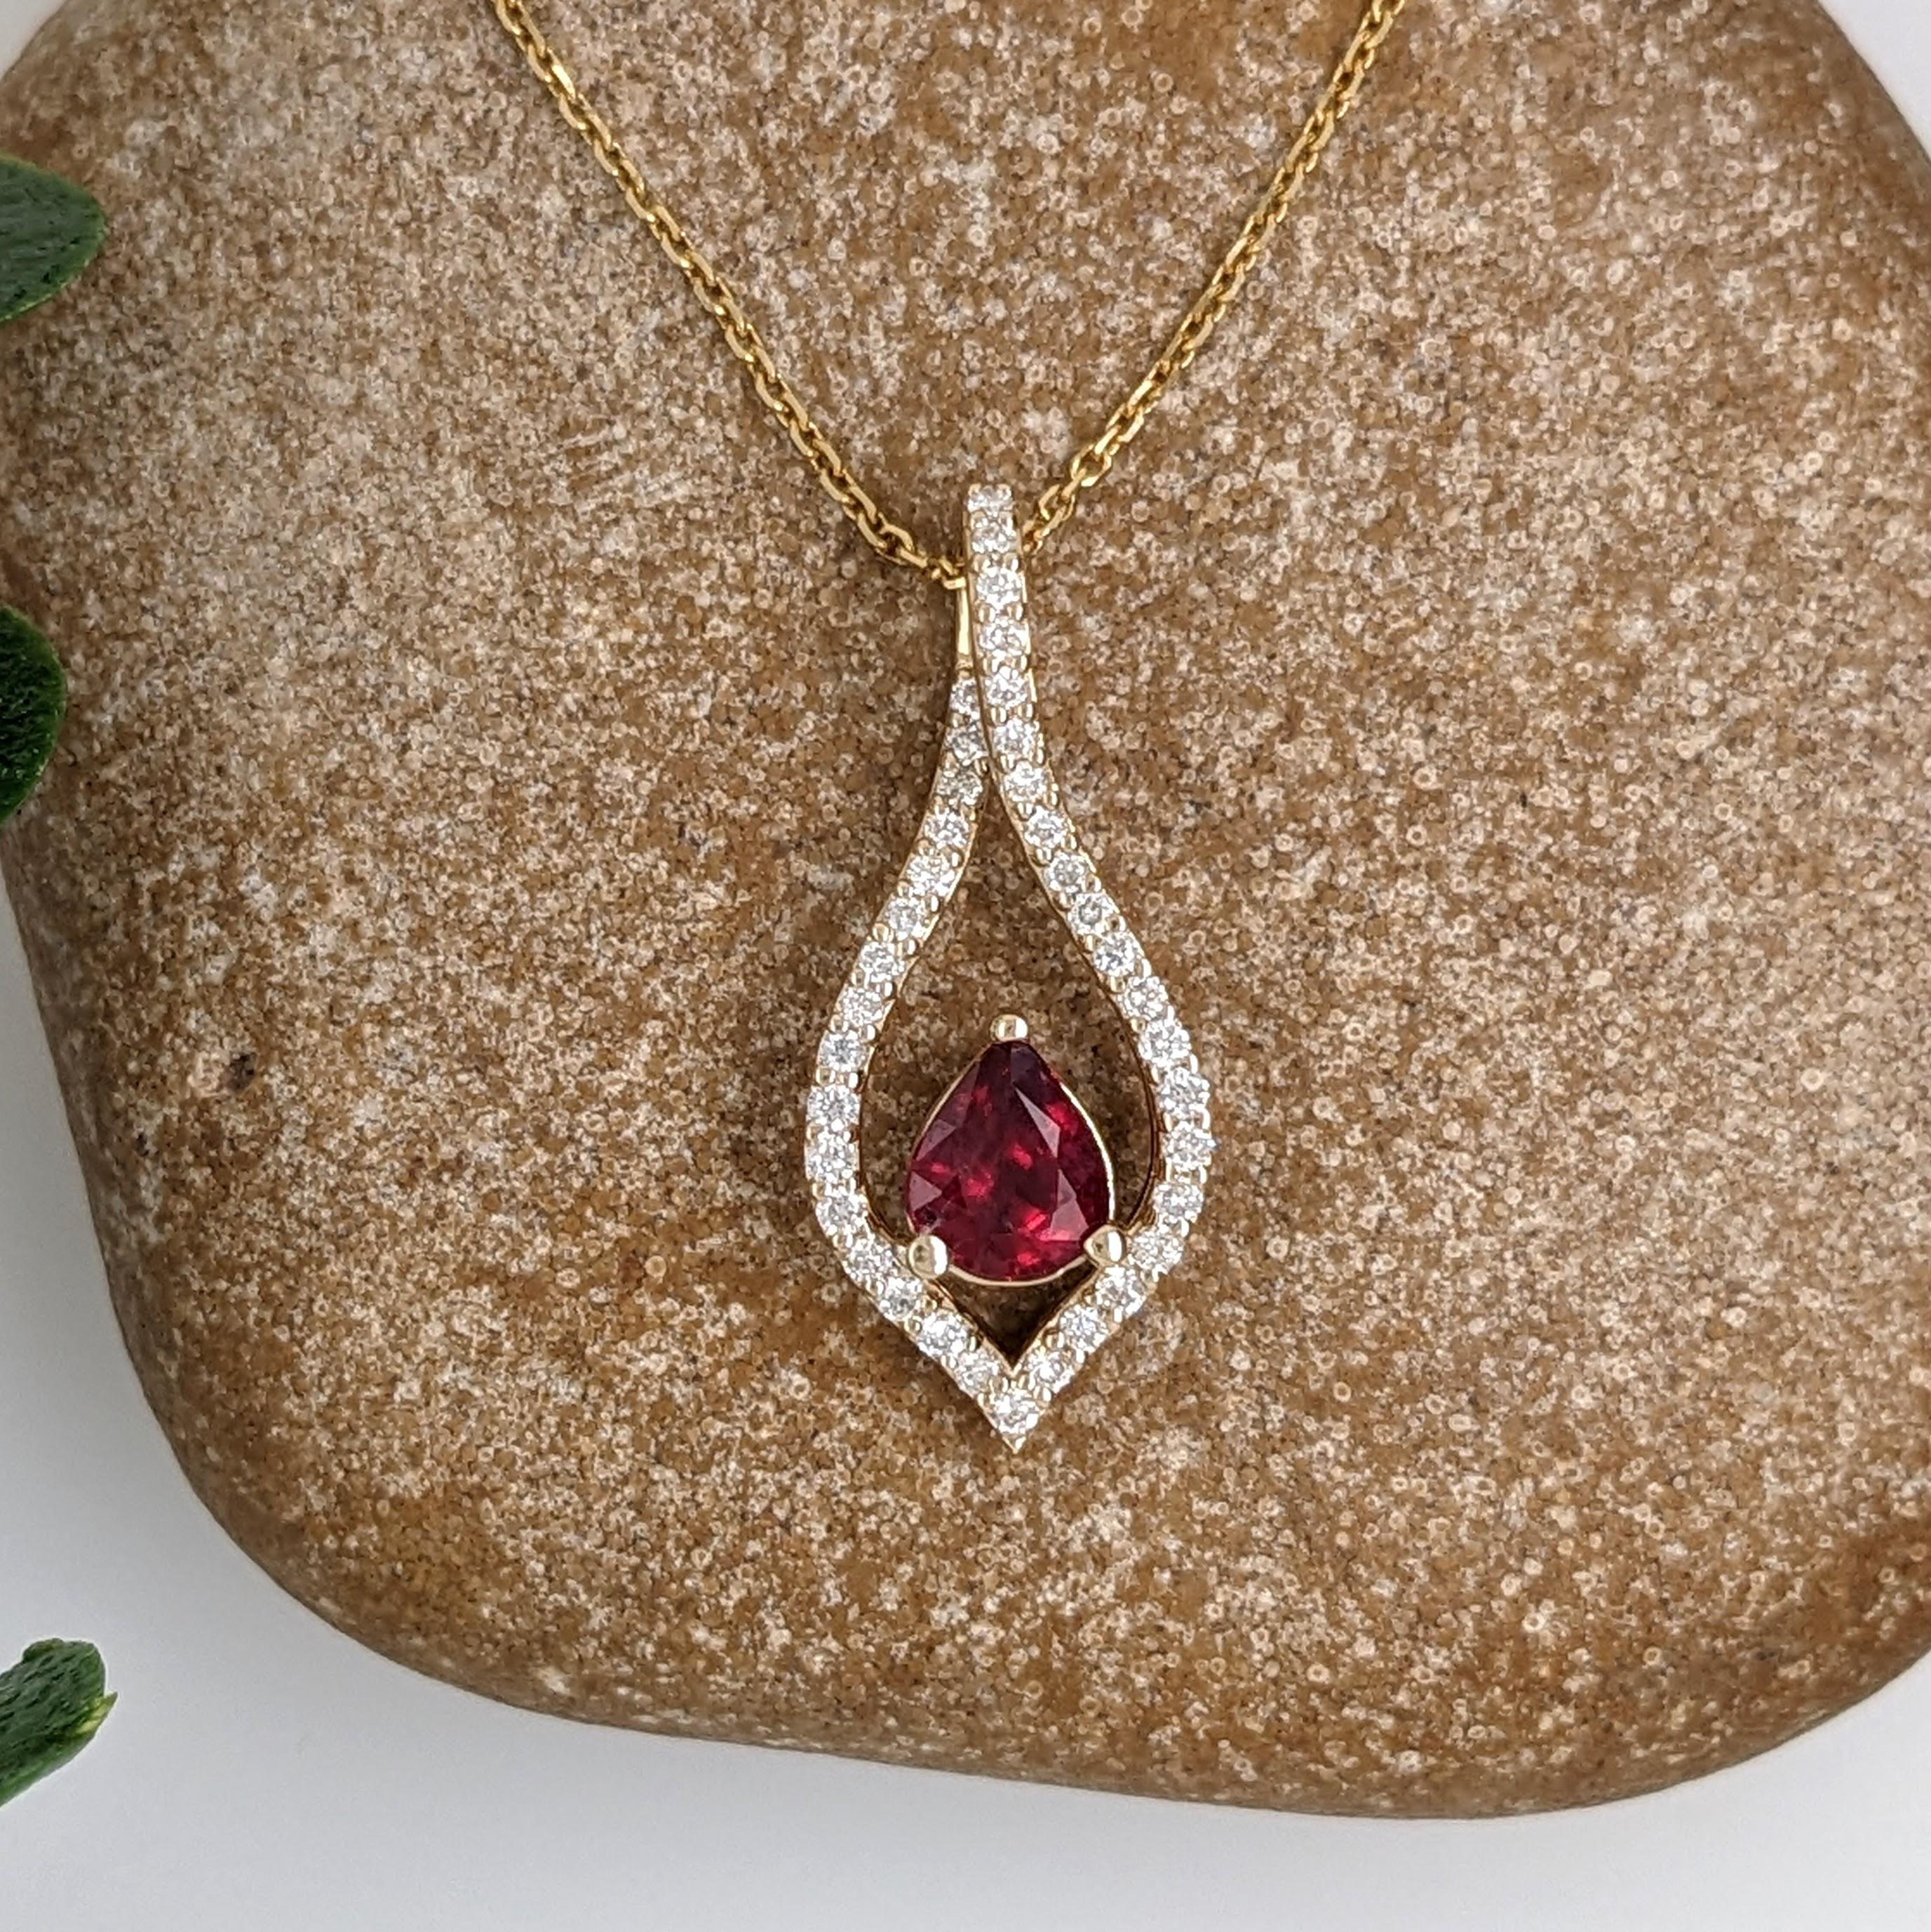 A gorgeous pendant featuring a 0.65 pear cut ruby from Mozambique all set in solid 14k yellow gold with all natural earth-mined diamonds. 

Specifications

Item Type: Pendant
Center Stone: Ruby
Treatment: Heated
Weight: 0.65ct
Head